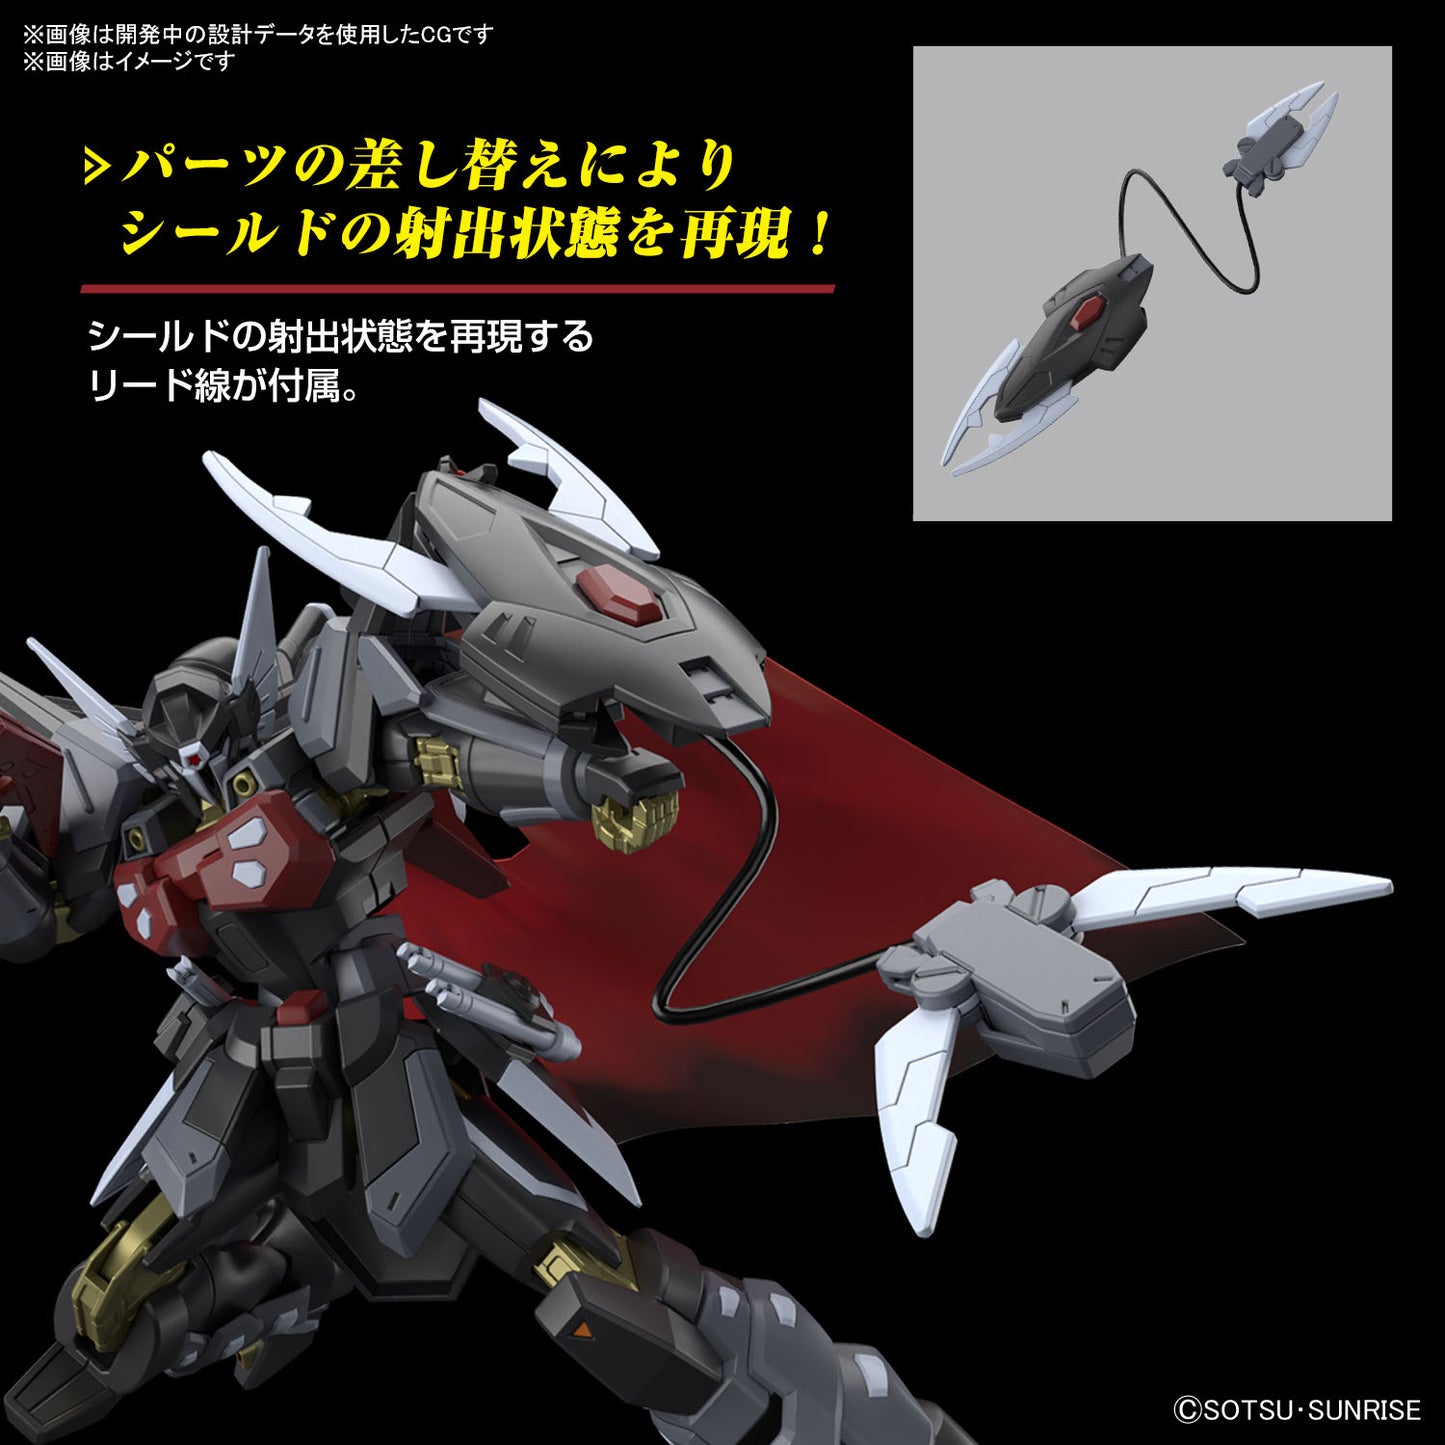 IN STOCK HG 1/144 Black Knight Squad Shi-ve.A Seed Freedom